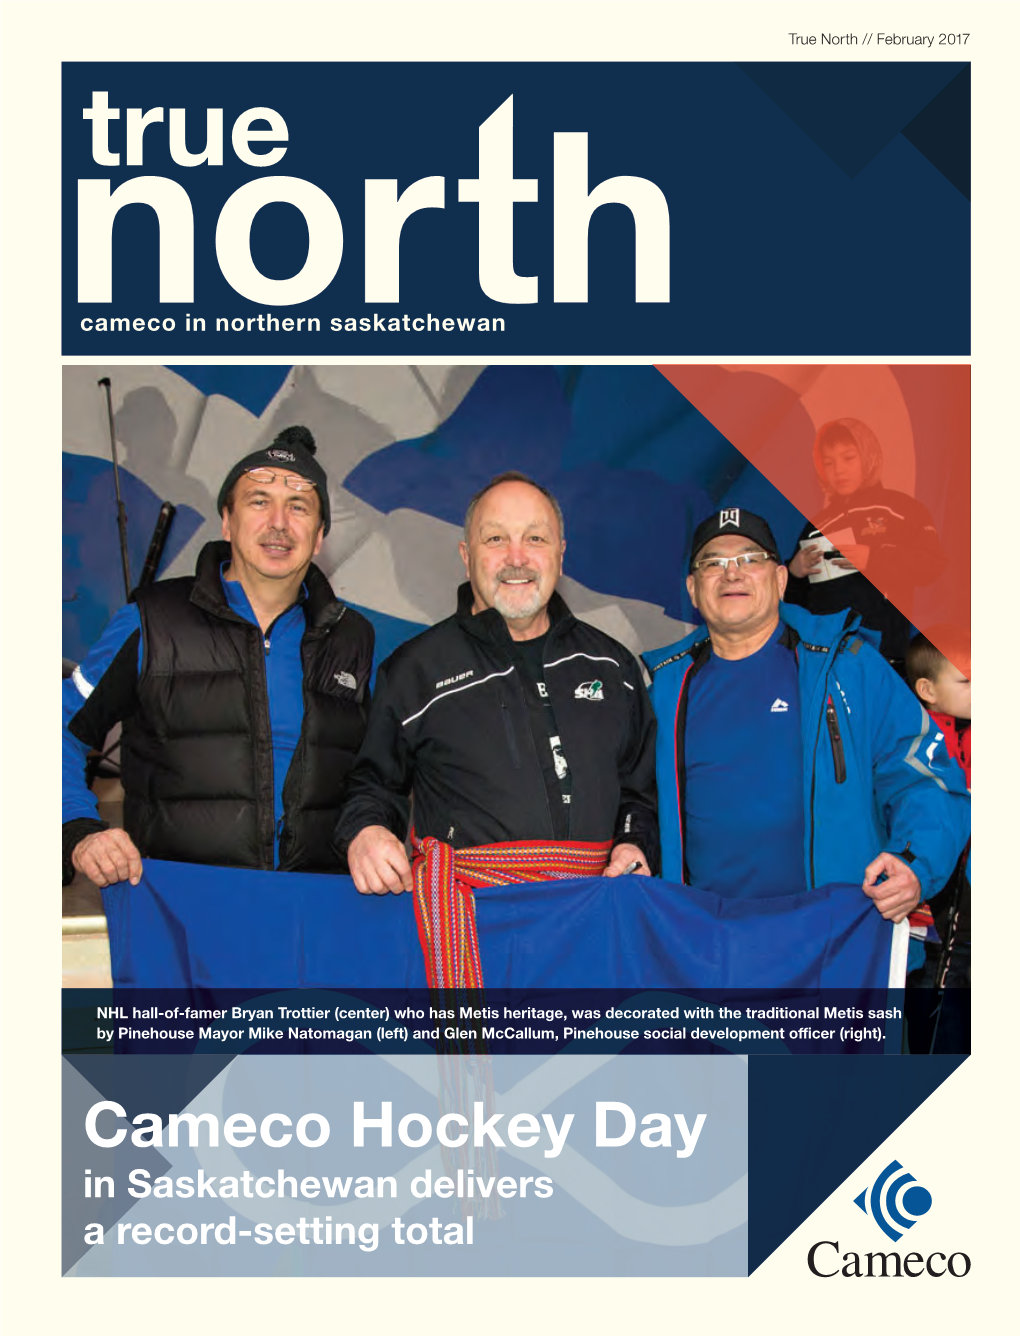 Cameco Hockey Day 2015 in Saskatchewan Delivers a Record-Setting Total Hockey Star Makes Impression in Pinehouse